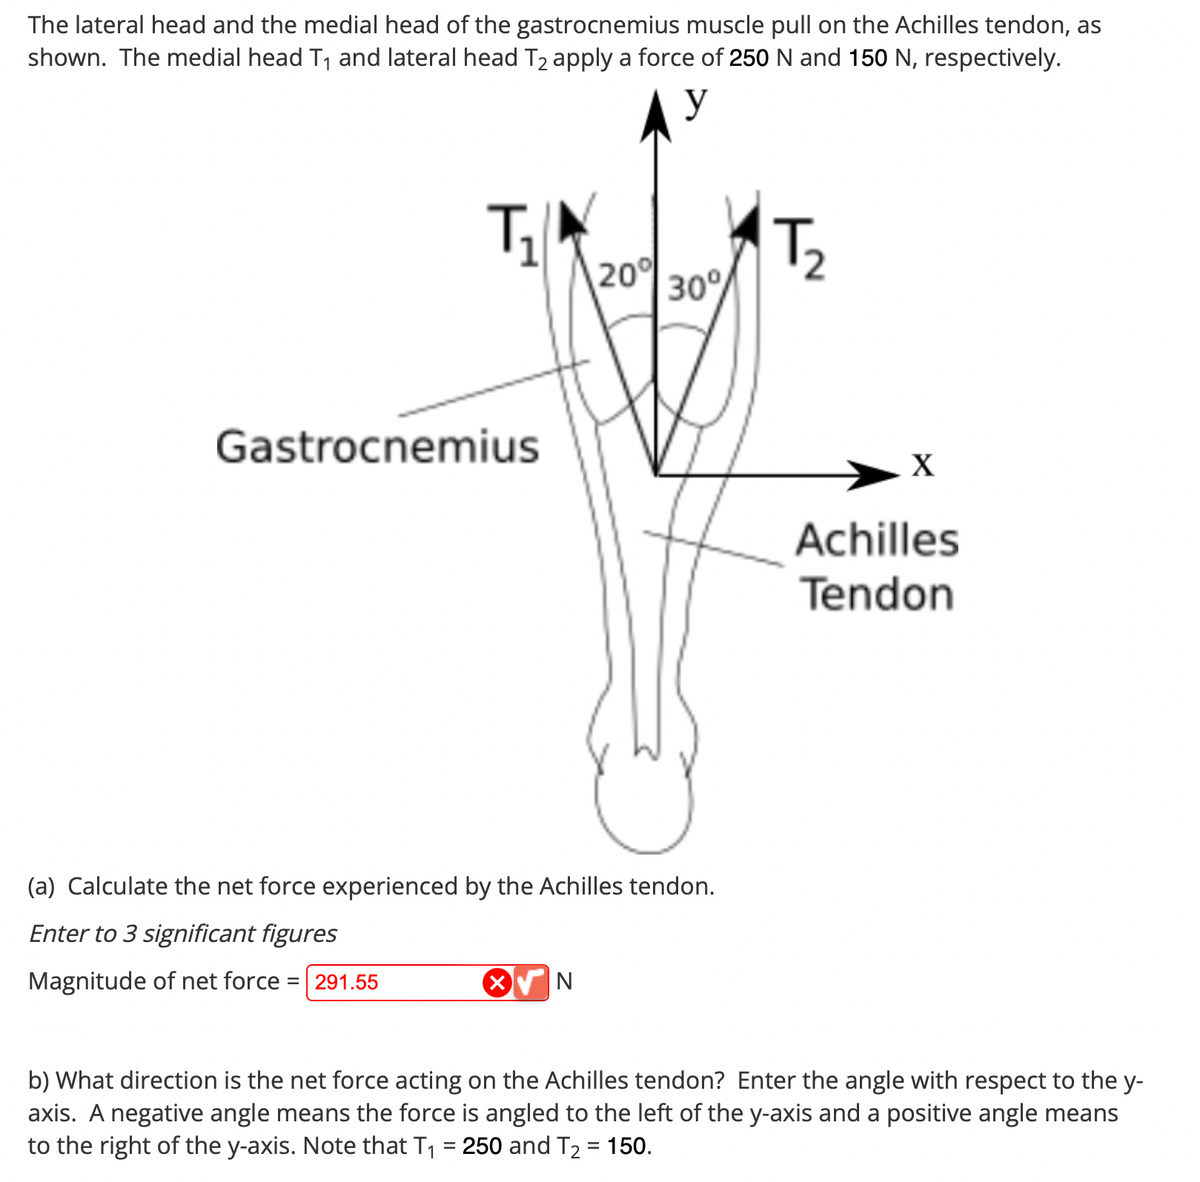 The lateral head and the medial head of the gastrocnemius muscle pull on the Achilles tendon, as
shown. The medial head T₁ and lateral head T₂ apply a force of 250 N and 150 N, respectively.
y
T₁
Gastrocnemius
20%
X N
30°
(a) Calculate the net force experienced by the Achilles tendon.
Enter to 3 significant figures
Magnitude of net force = 291.55
T₂
X
Achilles
Tendon
b) What direction is the net force acting on the Achilles tendon? Enter the angle with respect to the y-
axis. A negative angle means the force is angled to the left of the y-axis and a positive angle means
to the right of the y-axis. Note that T₁ = 250 and T₂ = 150.